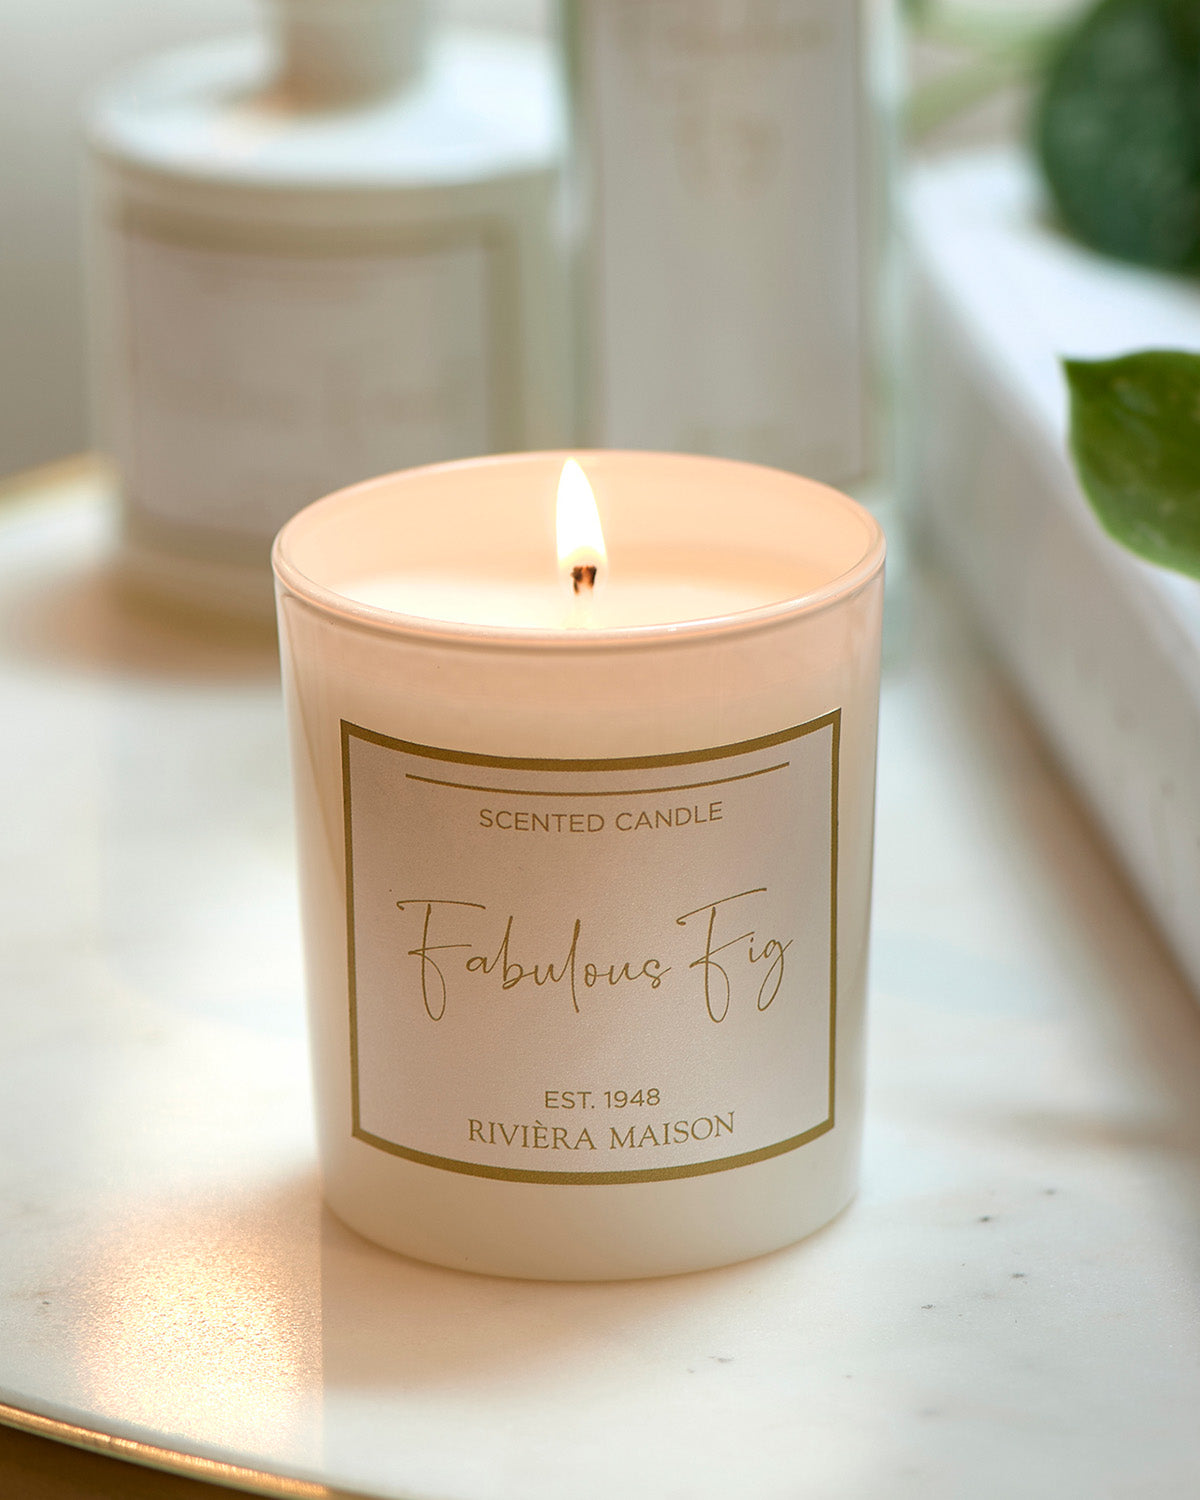 FIG SCENTED CANDLE, cedar, and peony, in a white glass by Riviera Maison